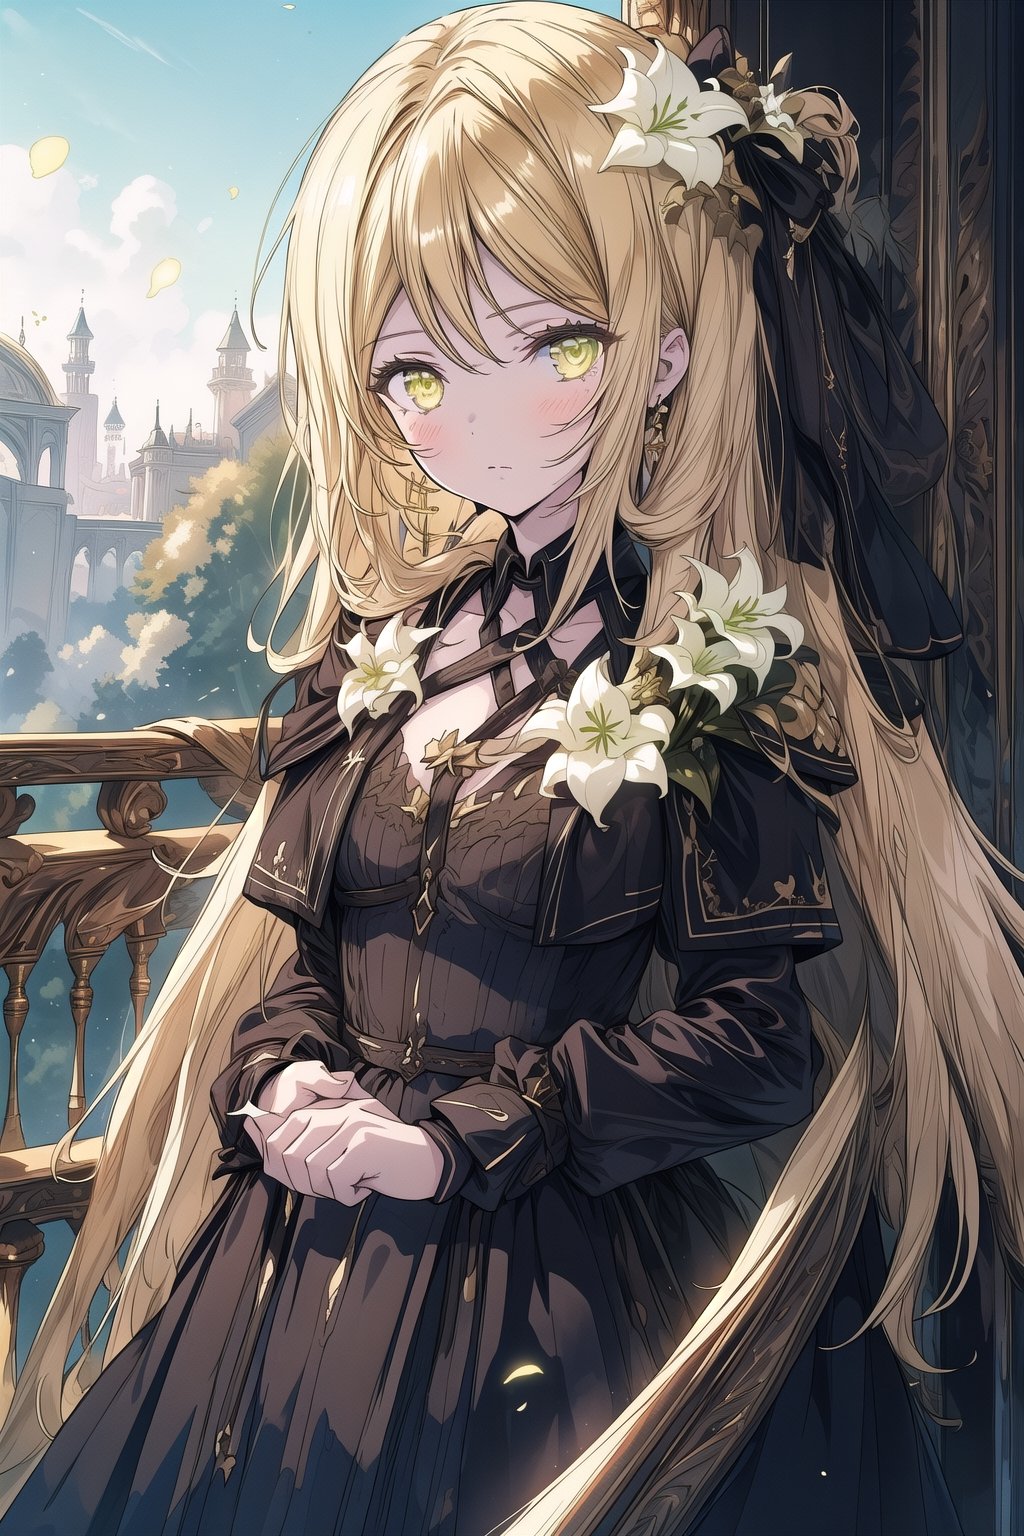 1 girl, surrounded by energy, long blonde hair, wavy hair, golden eyes, black dress, white lily, palace exterior elegant, palace,  good lighting, cold expression, high quality, shiny hair, detailed dress,fantasy00d, add brightness, pretty black dress, outdoors, solo, balcony, perfect hands